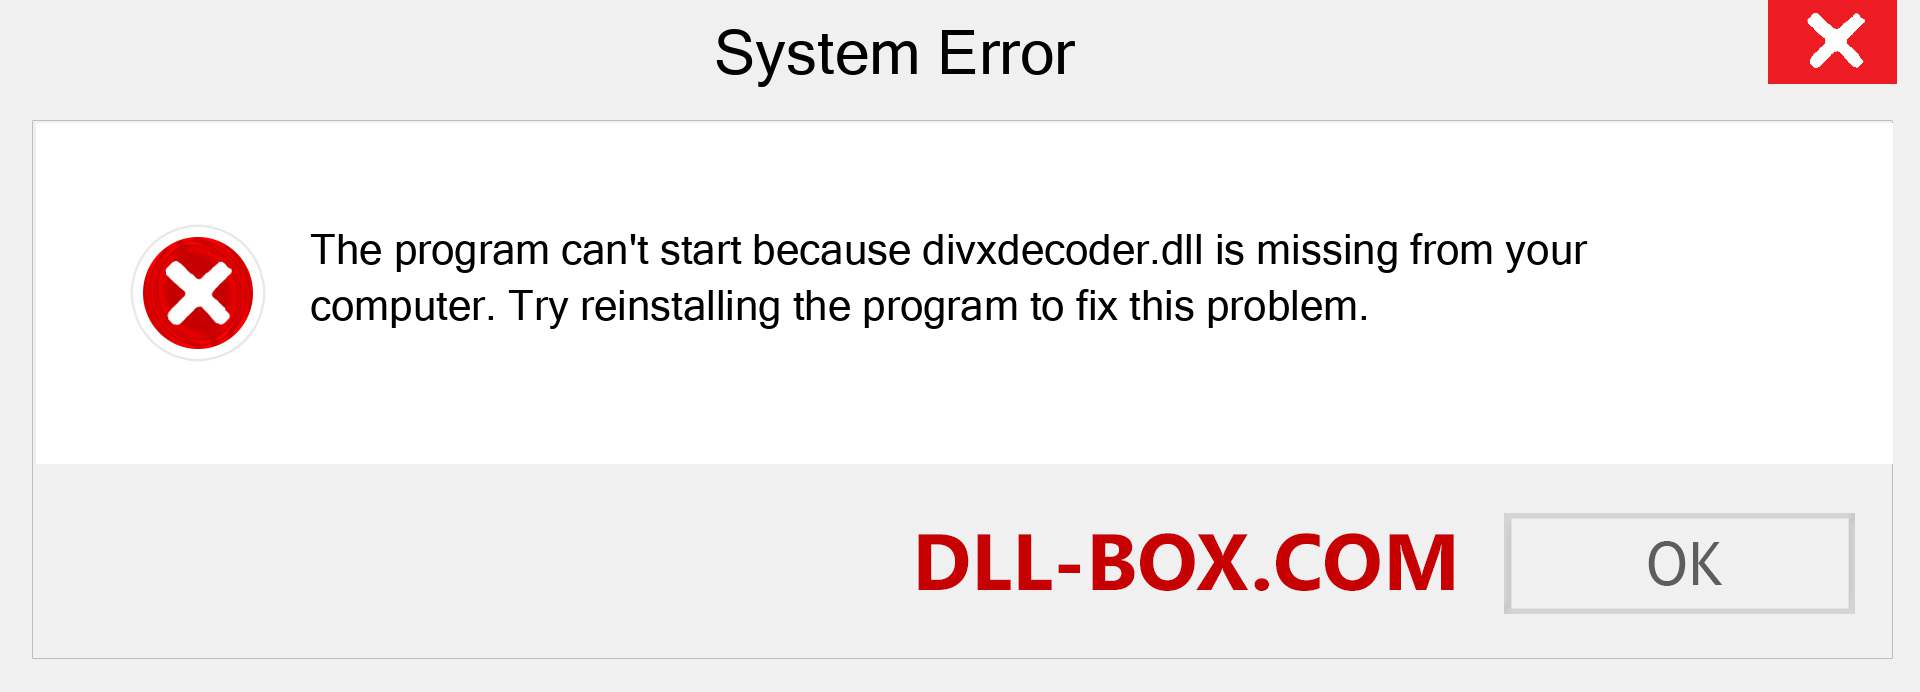  divxdecoder.dll file is missing?. Download for Windows 7, 8, 10 - Fix  divxdecoder dll Missing Error on Windows, photos, images